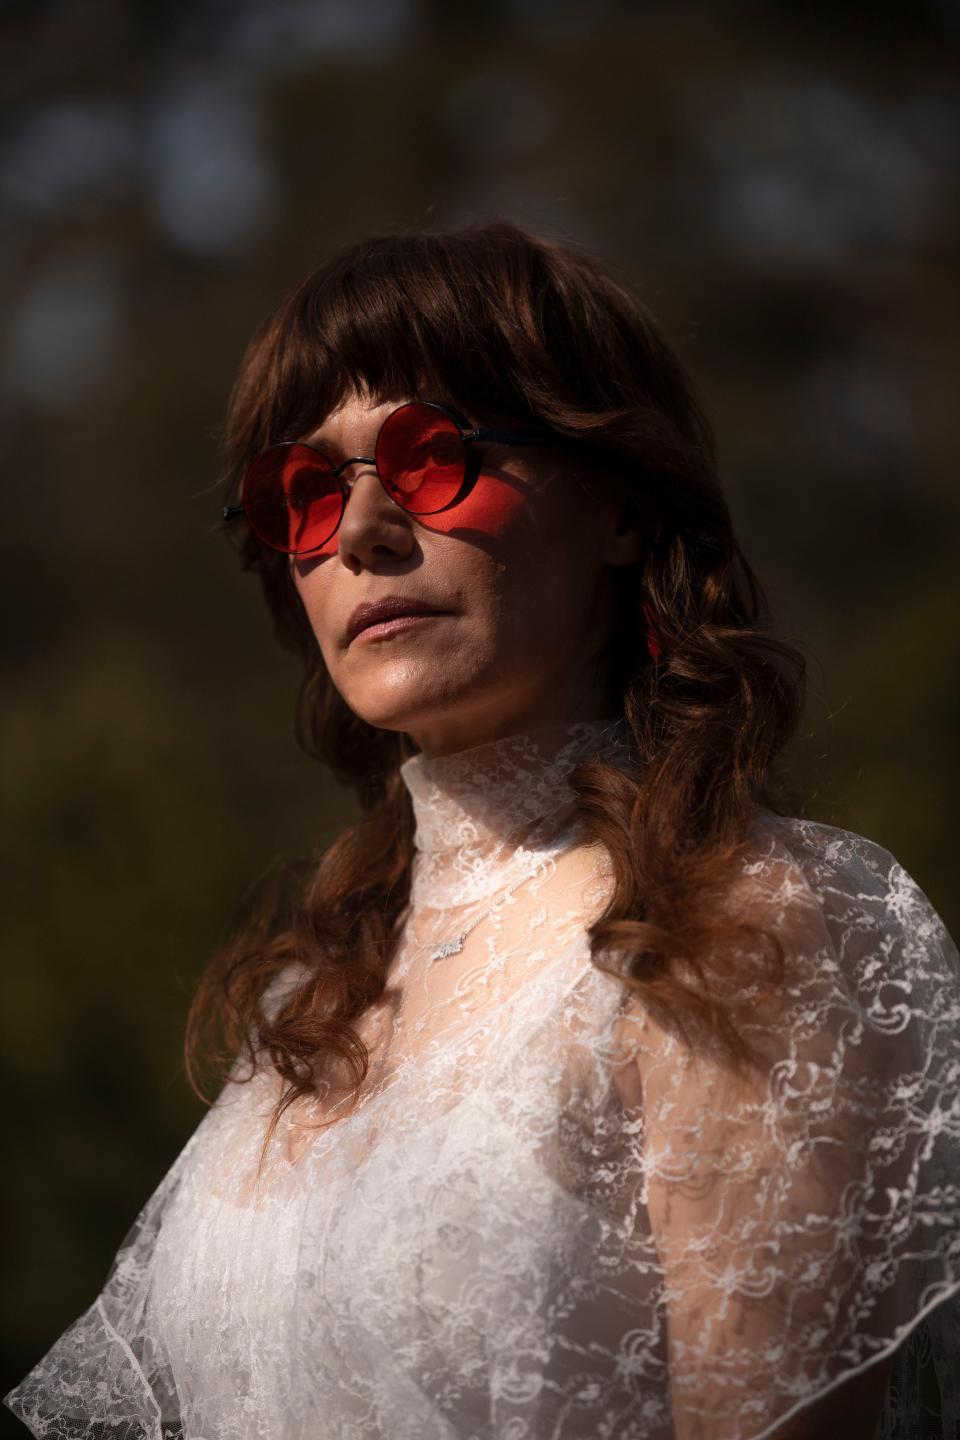 Jenny Lewis returns to the stage of the Ryman Auditorium this month for the first time since March 2019.